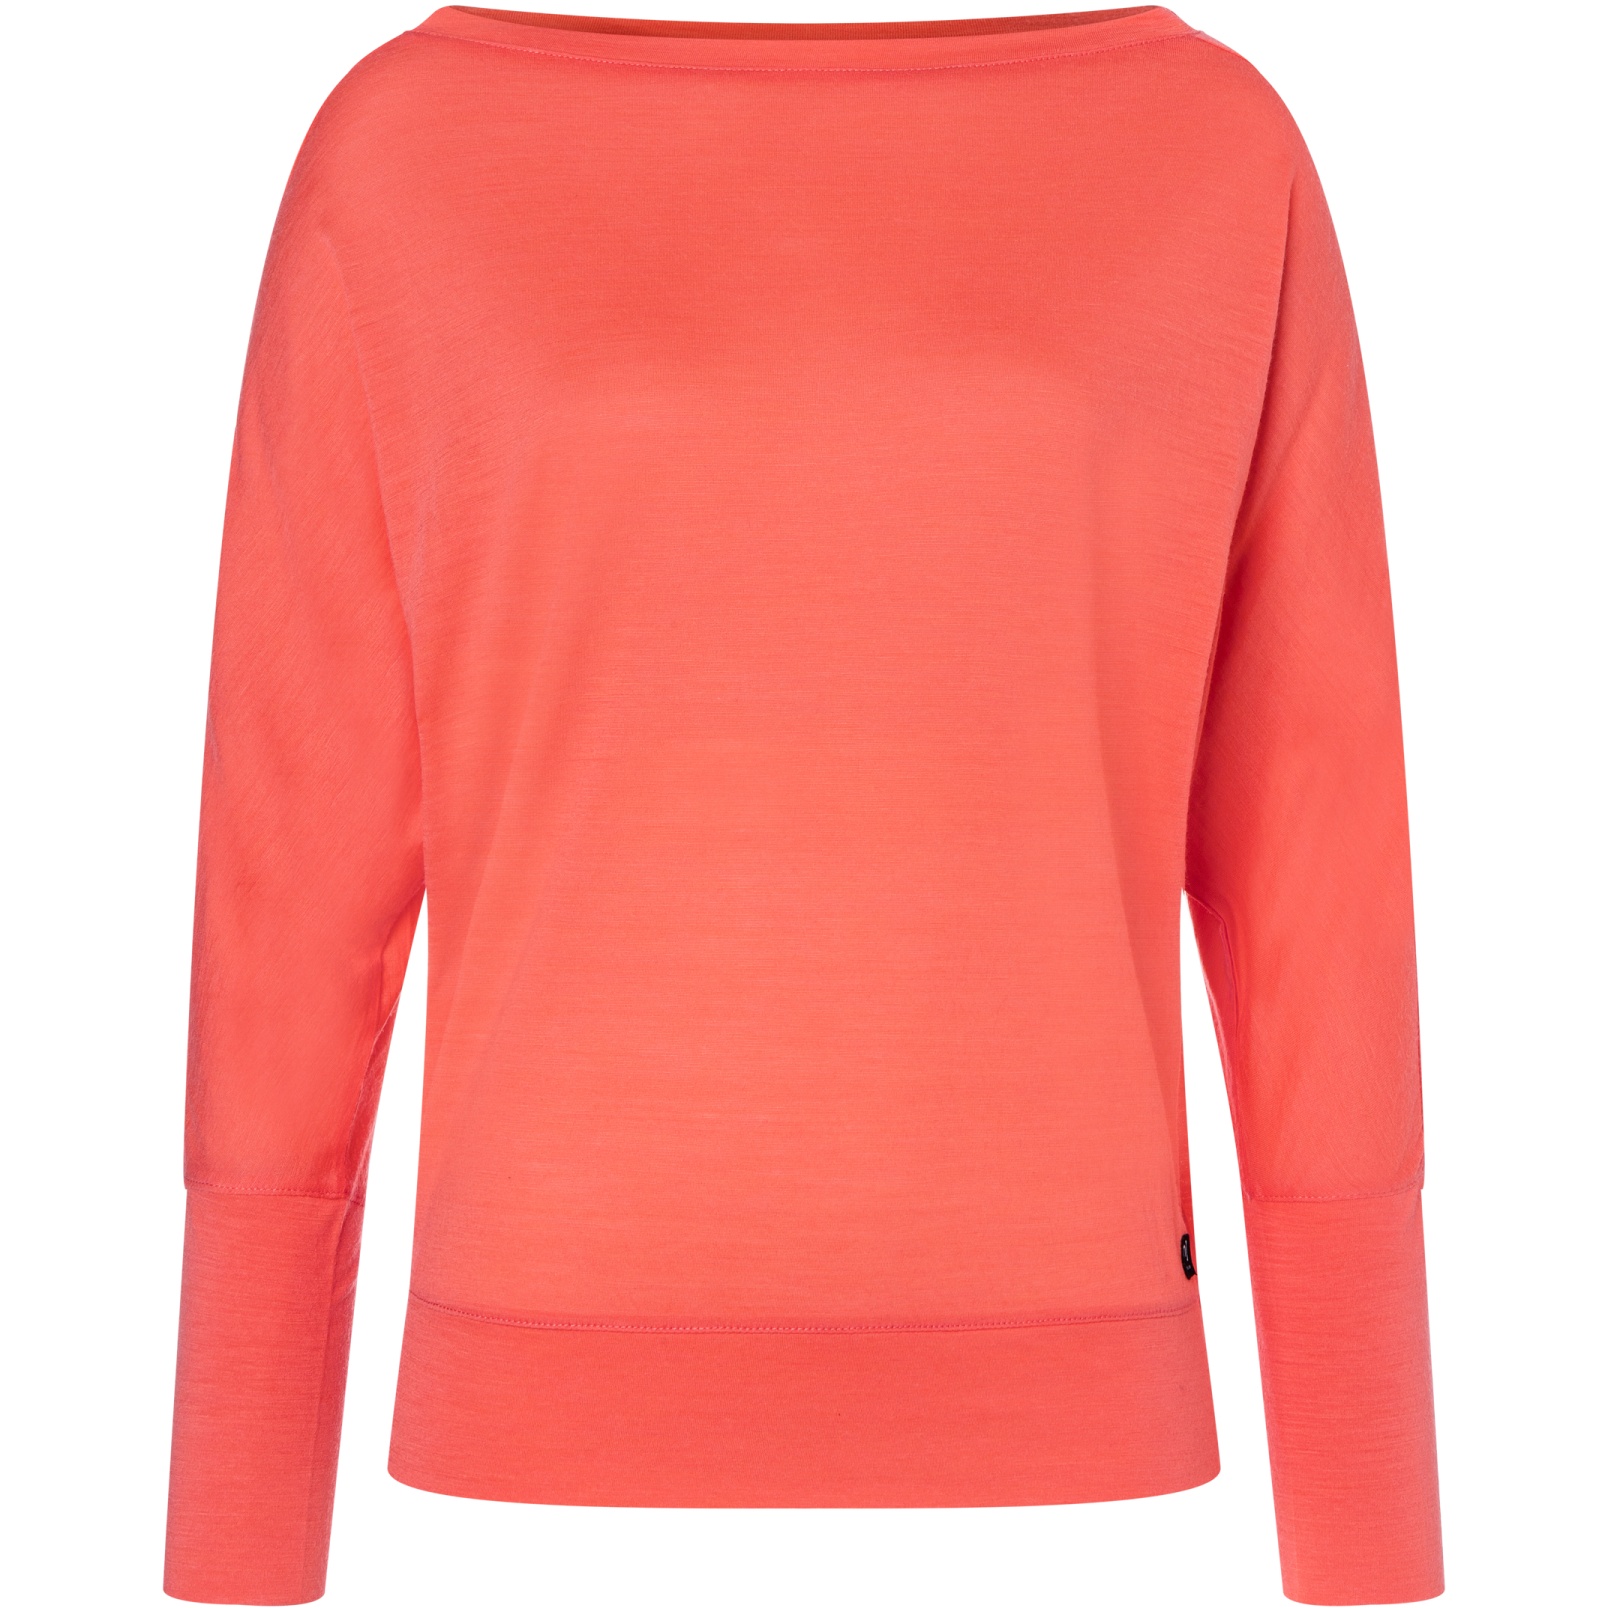 Picture of SUPER.NATURAL Kula Top Women - Living Coral